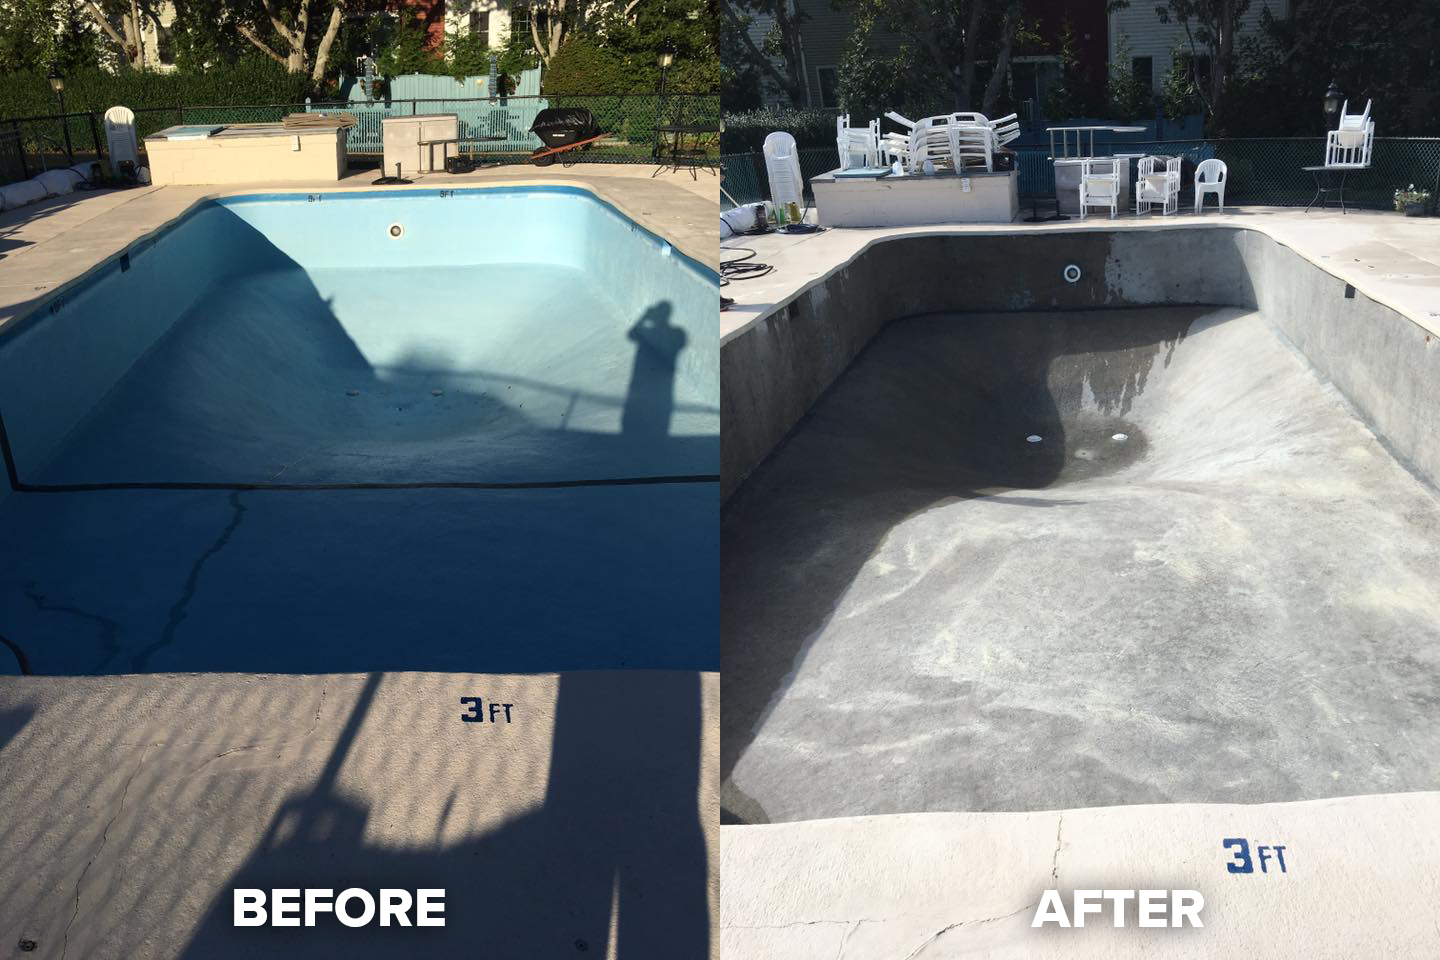 Resurfacing of a concrete pool before and after with residential sandblasting services from Central Alabama Mobile Sandblasting